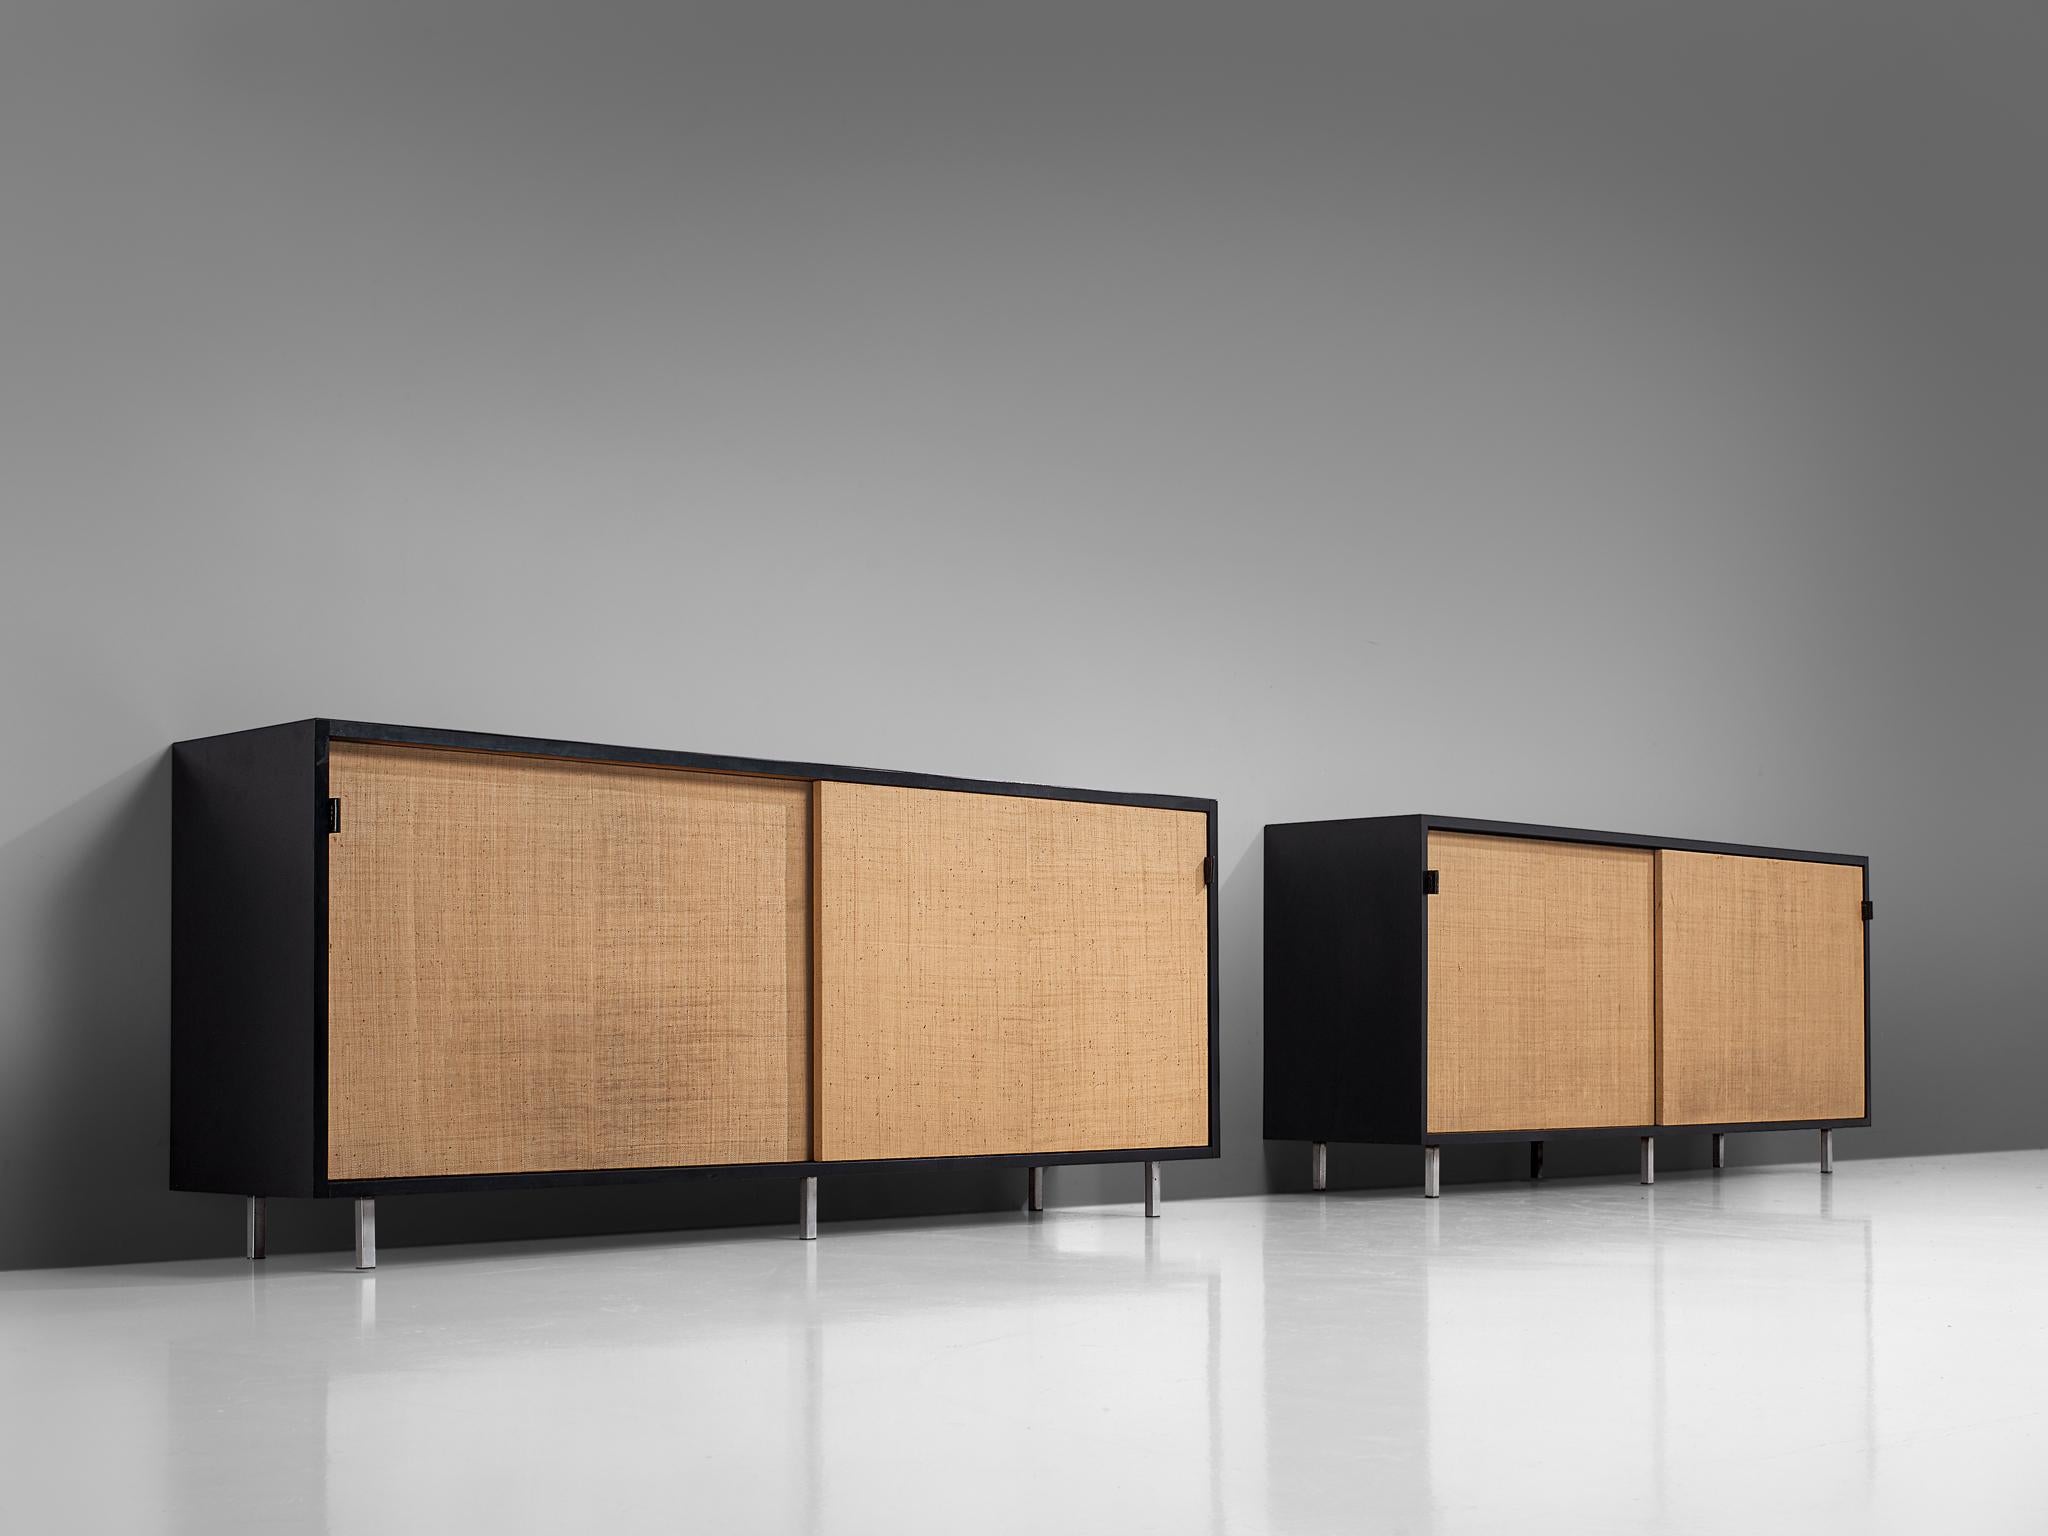 Florence Knoll for Knoll, pair of sideboards, cane, ebonized wood, and metal, United States, 1961.

These sideboards are designed by Florence Knoll for Knoll International and were meant for the headquarters of Knoll in Italy. The credenzas are